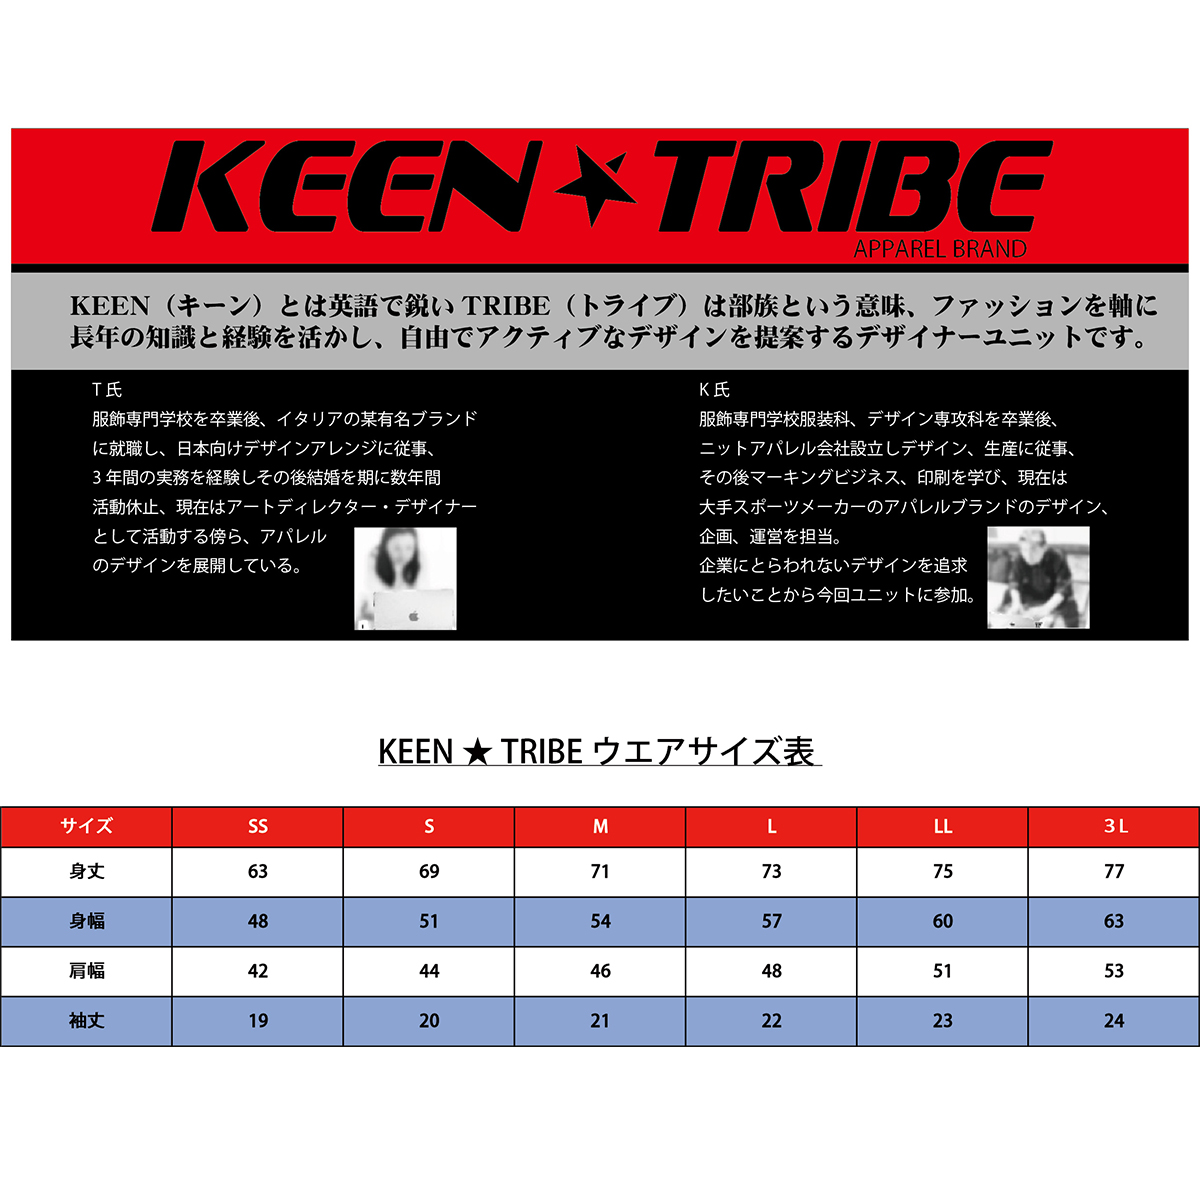 KEEN ★ TRIBE　KT-75(受注生産)